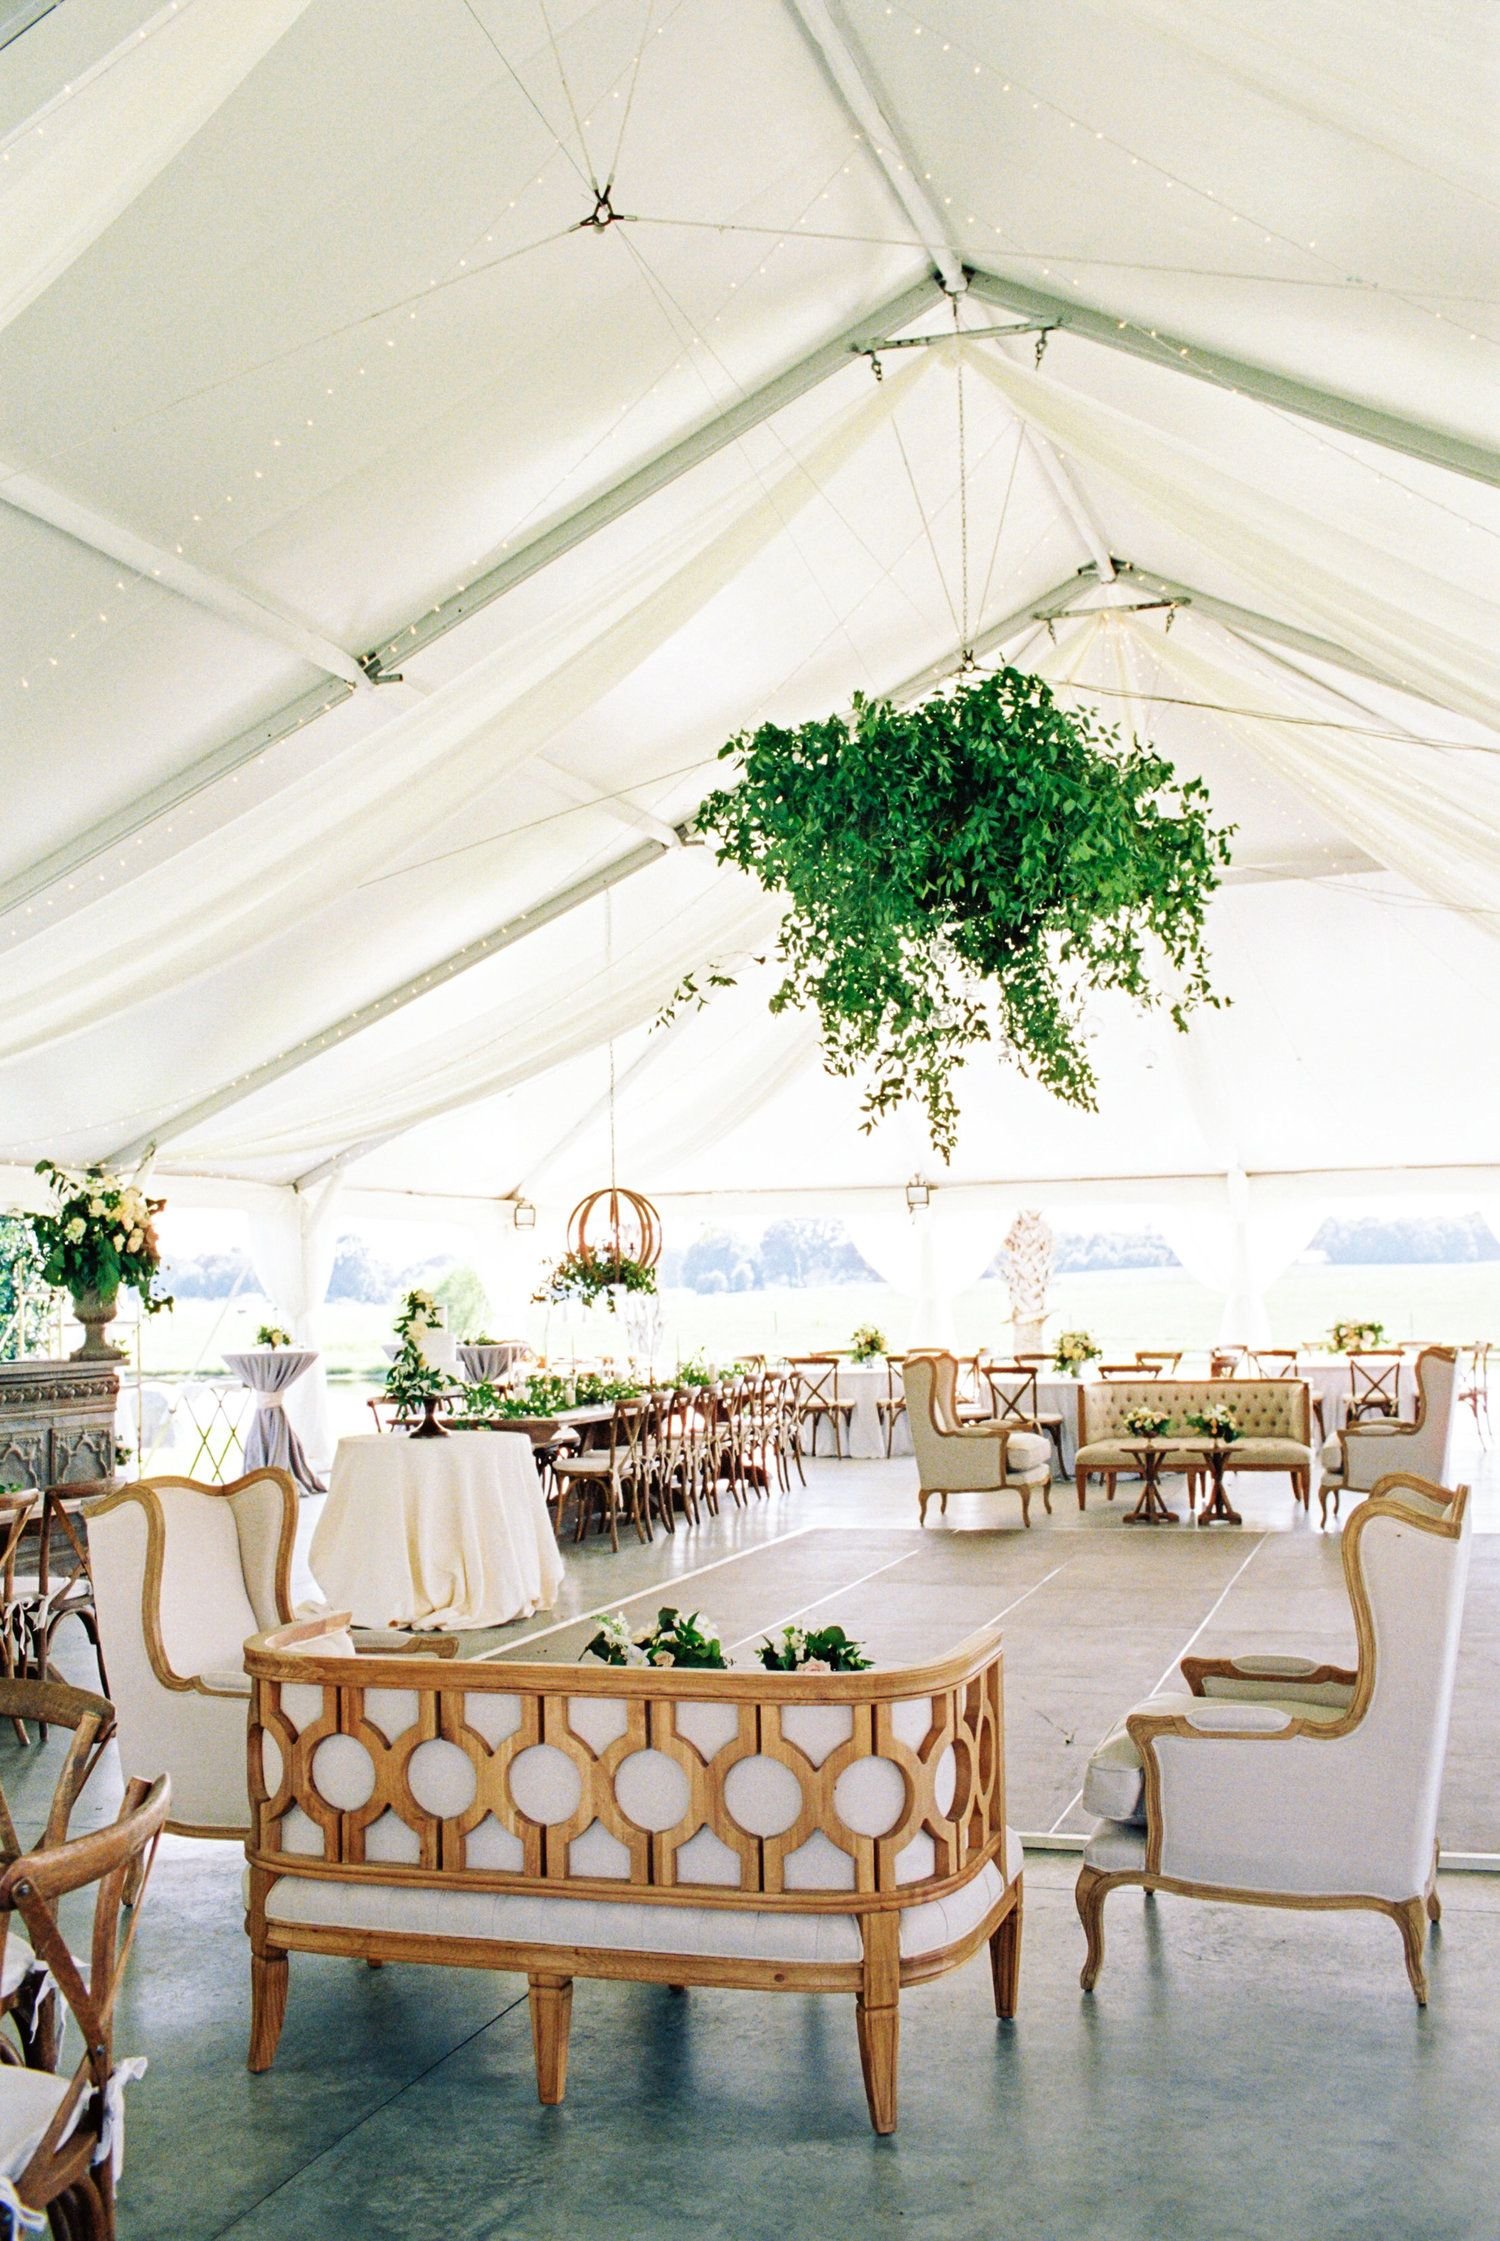 A Greenery-Filled Tented Wedding at Champagne Manor  _  New Orleans, Louisiana  _  Wedding Planning & Design  _  The Graceful Host.jpg